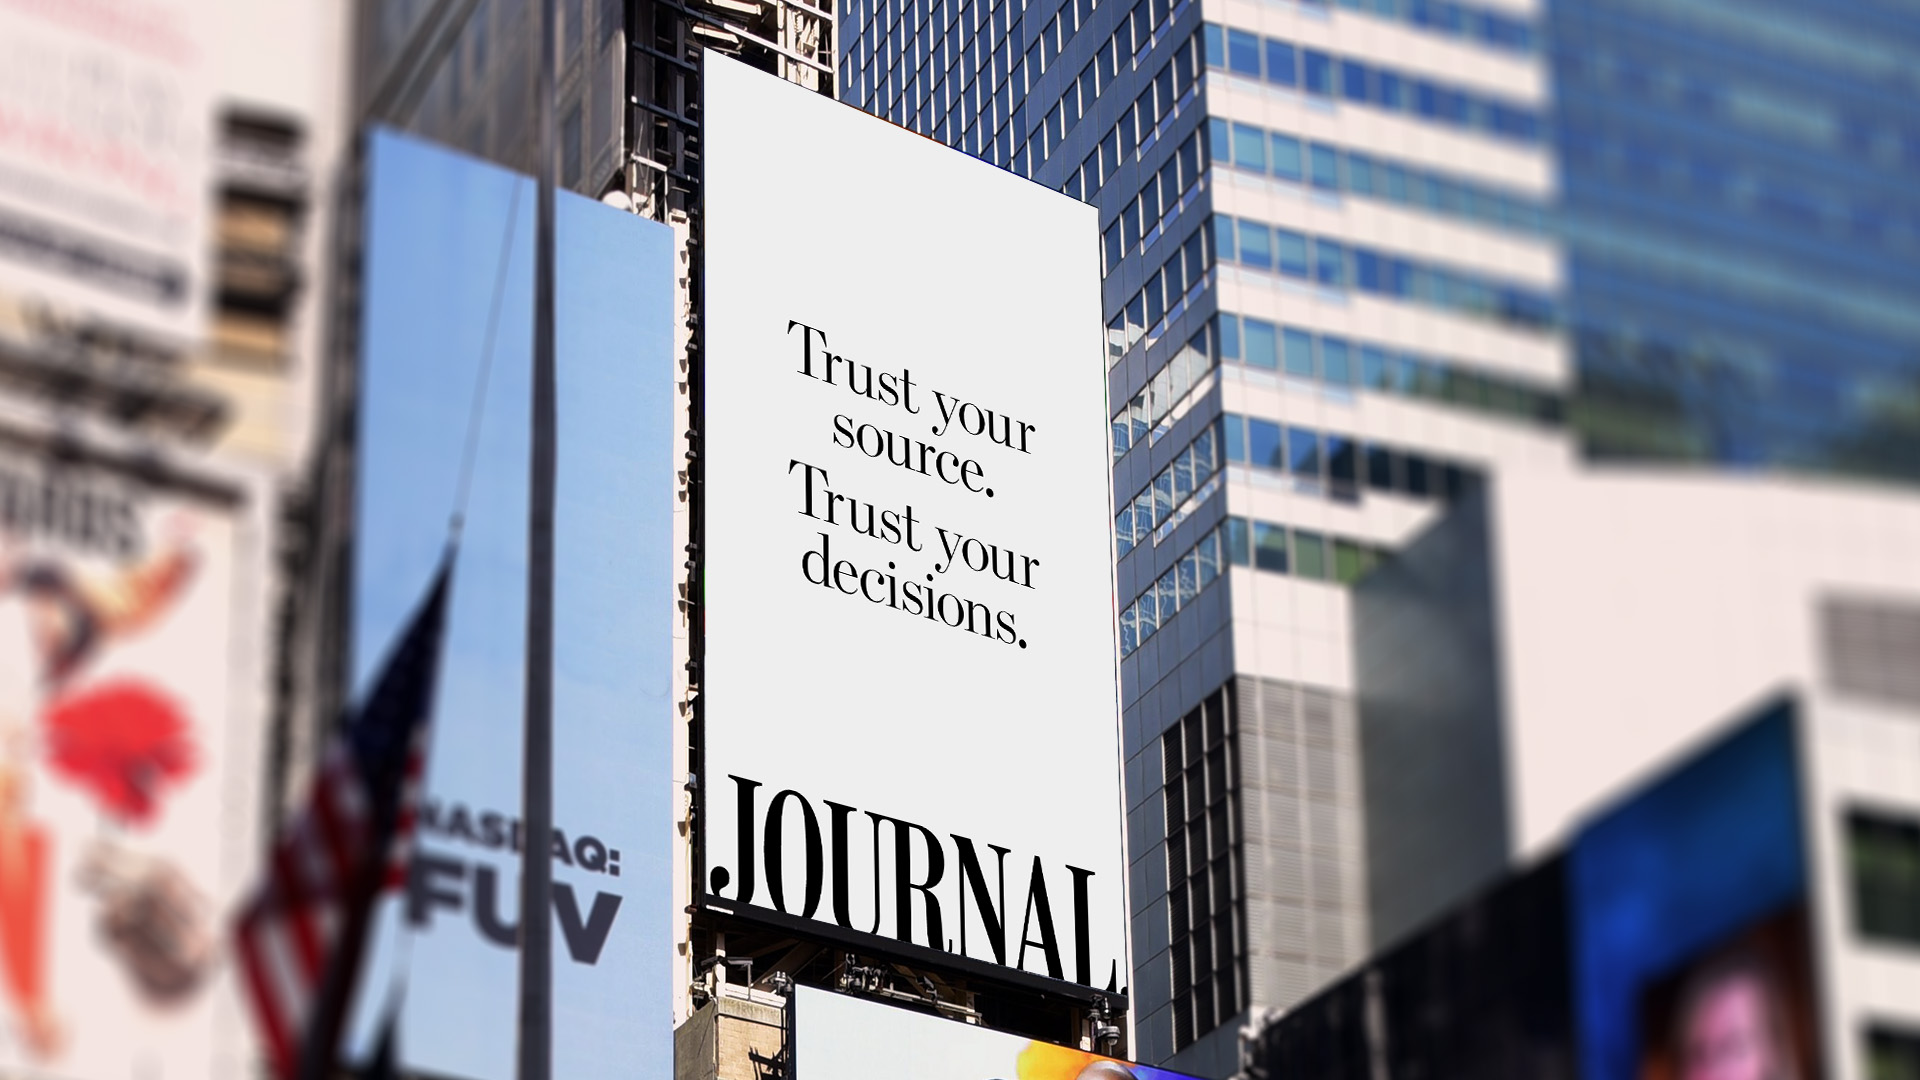 The Wall Street Journal launches BUY SIDE FROM WSJ, a new and